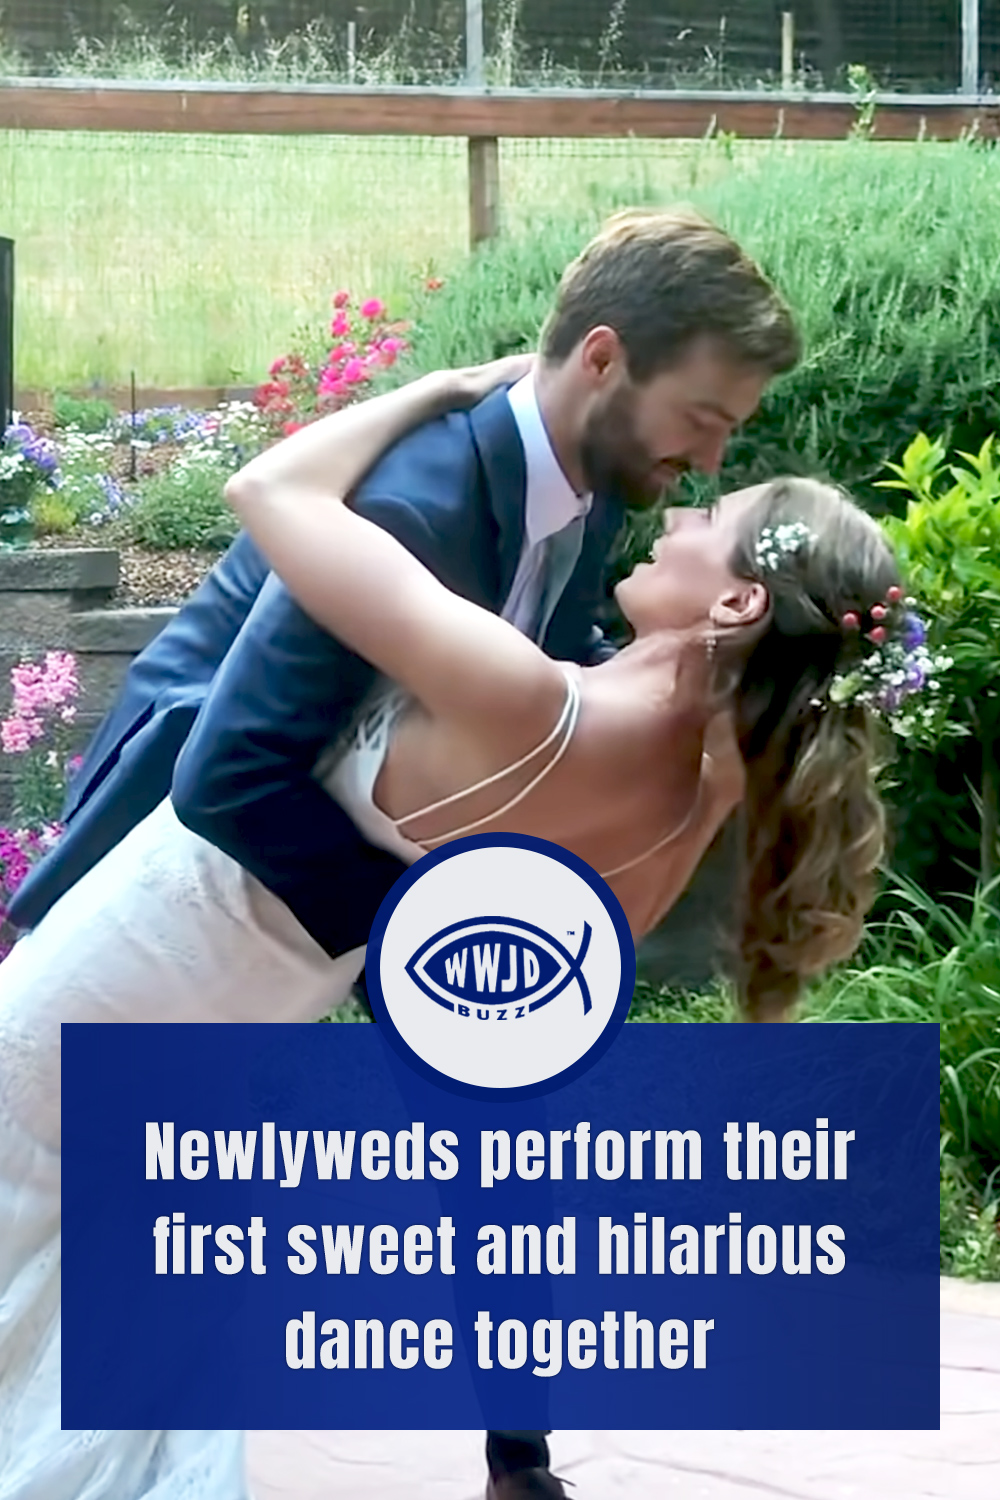 Newlyweds perform their first sweet and hilarious dance together